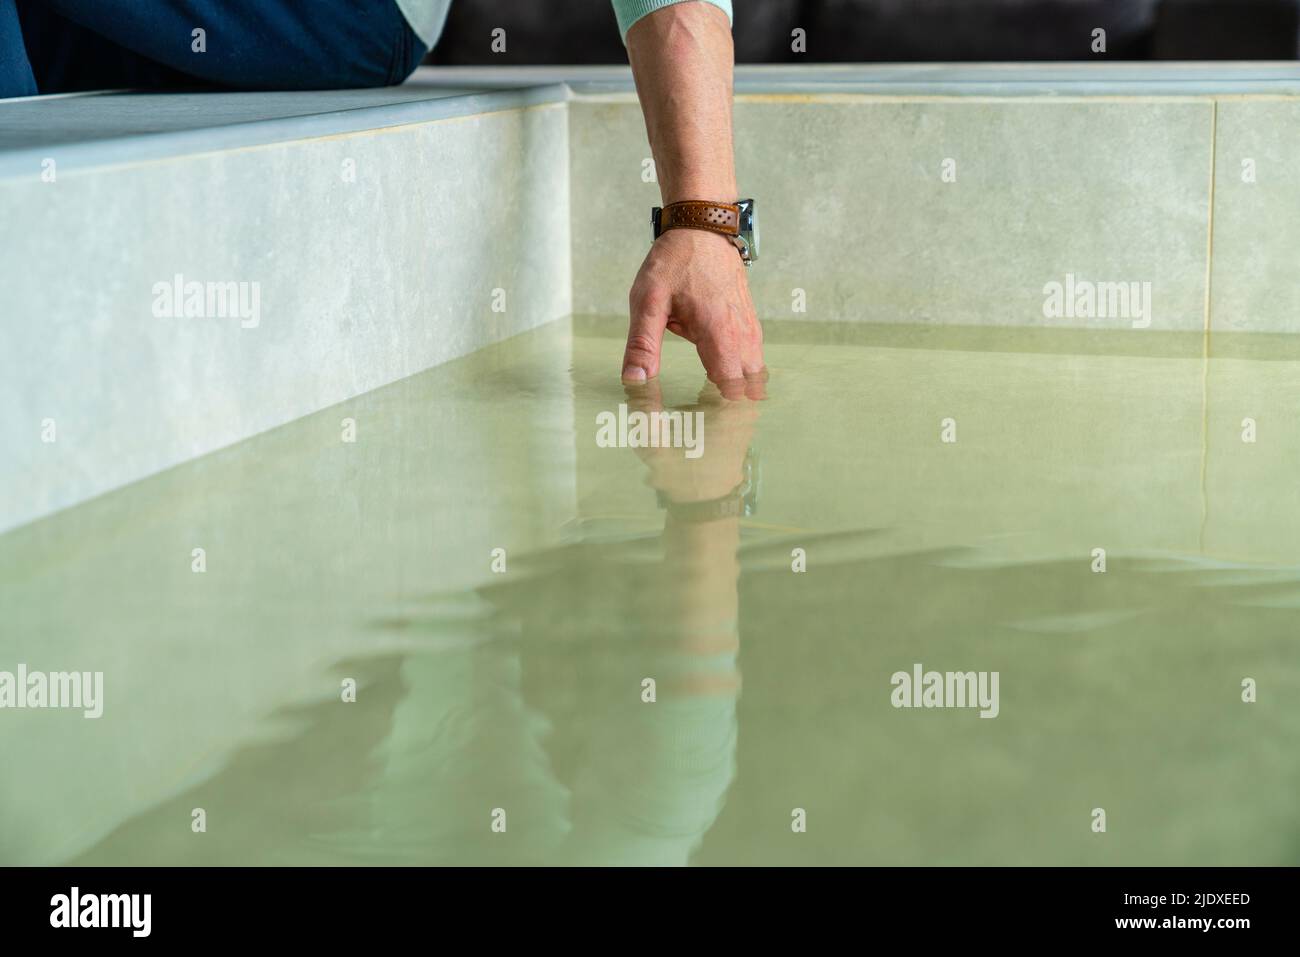 Man dipping hand in water at home Stock Photo